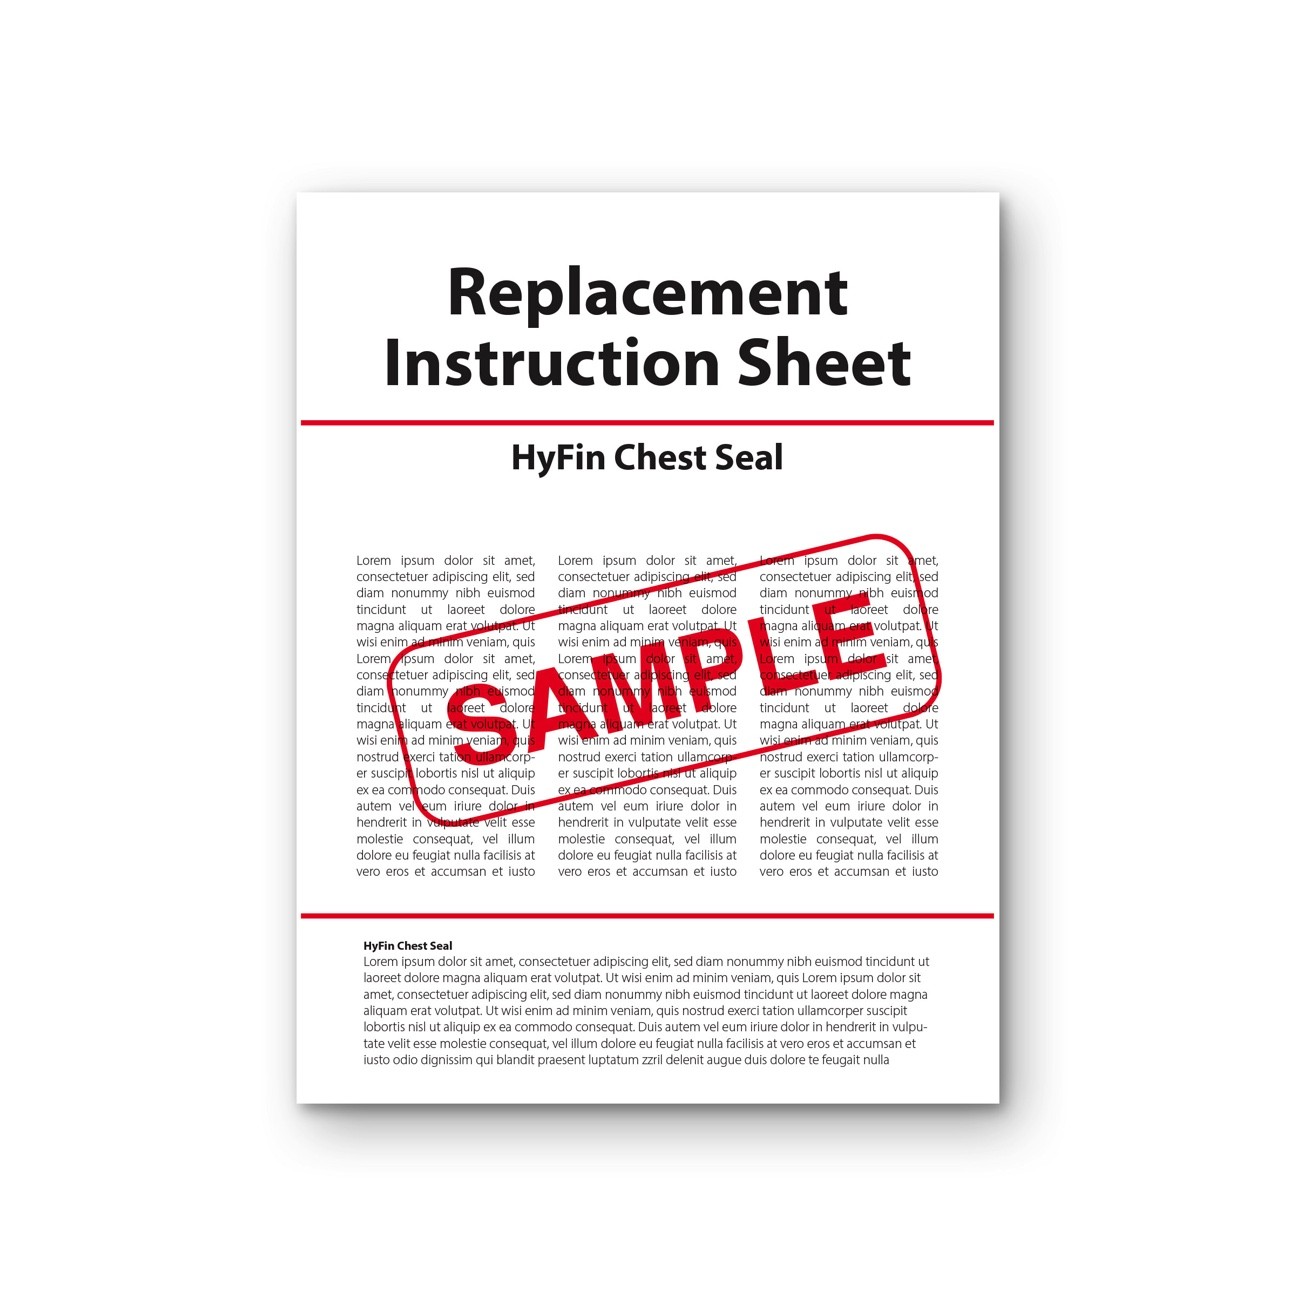 Replacement Instruction Sheet - HyFin Chest Seal